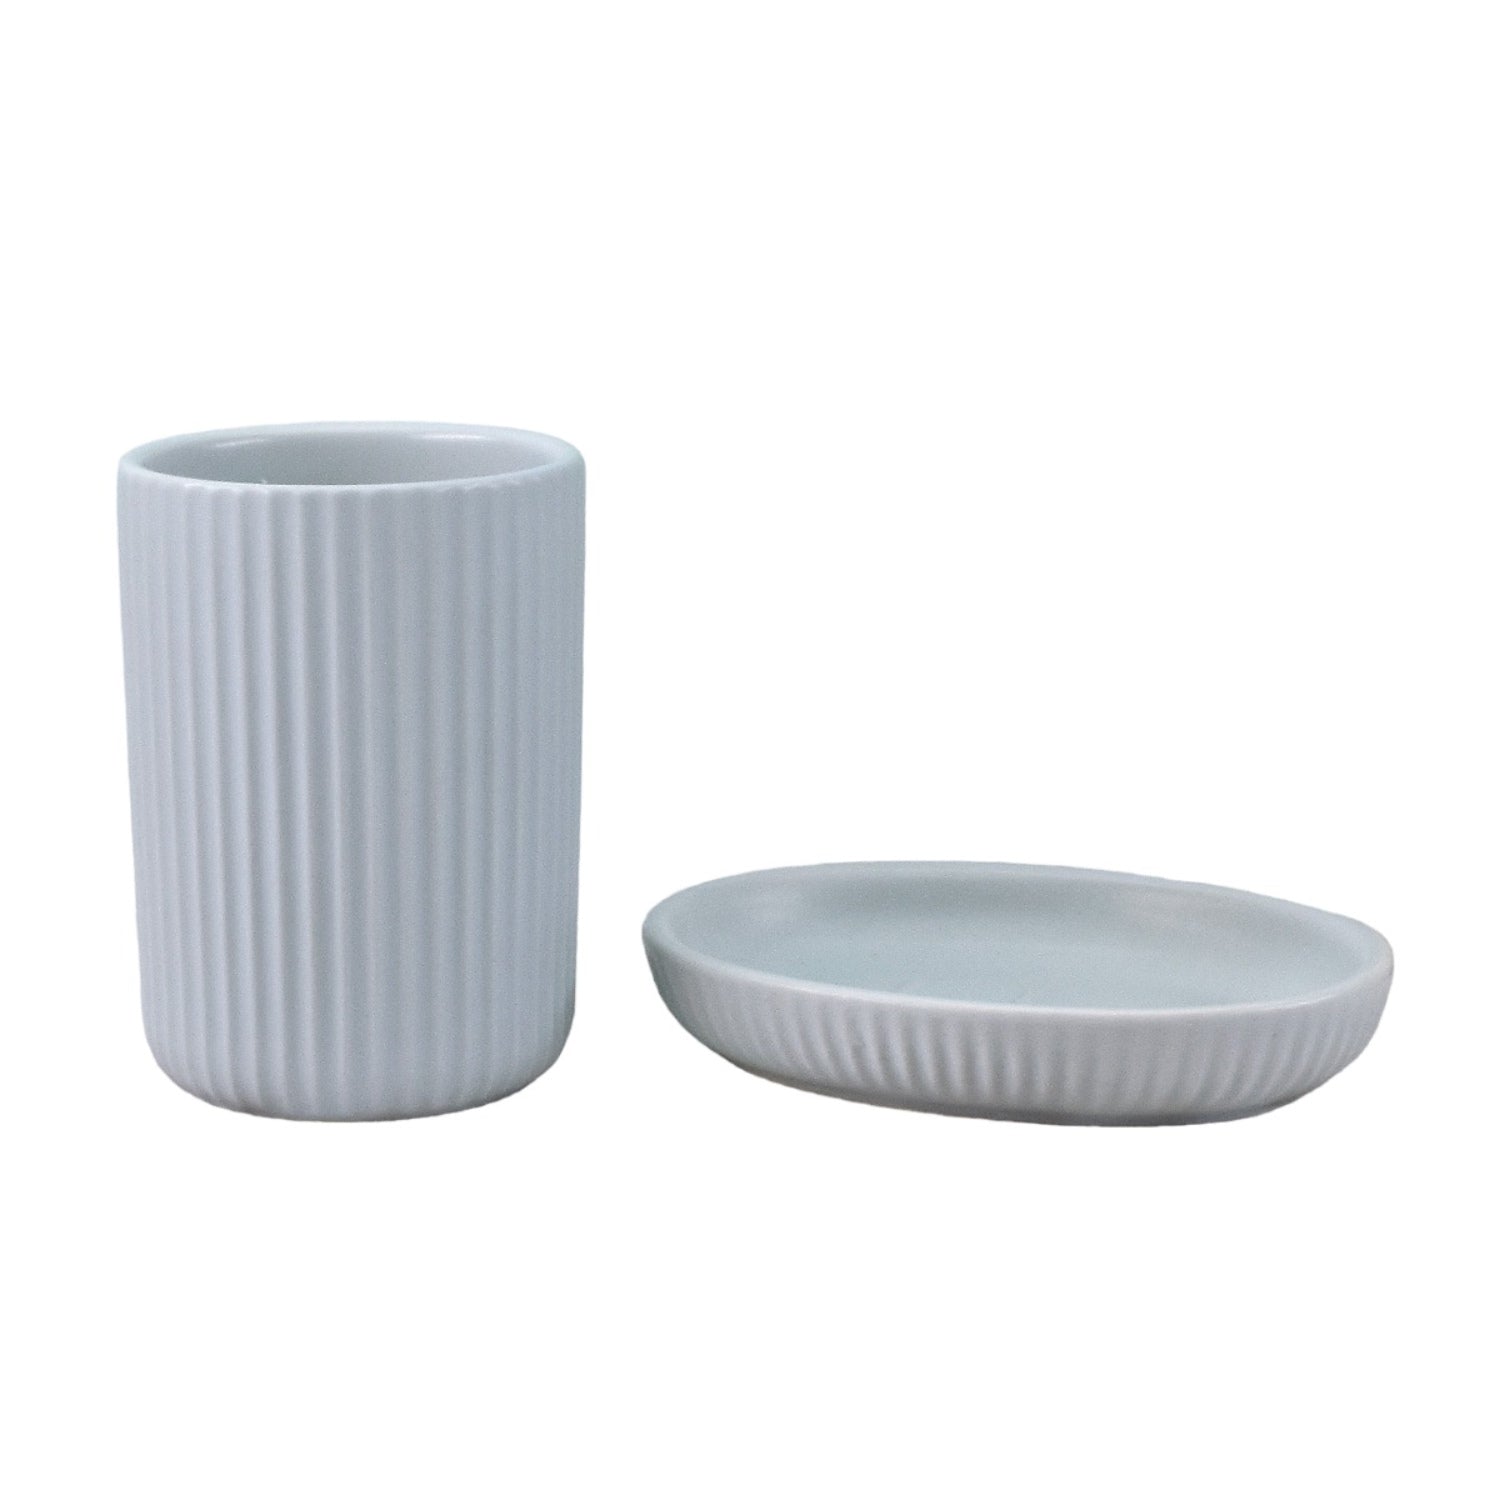 Ceramic Soap Dish Set with Toothbrush Holder, Set of 2 Bathroom Accessories for Home (C2045)